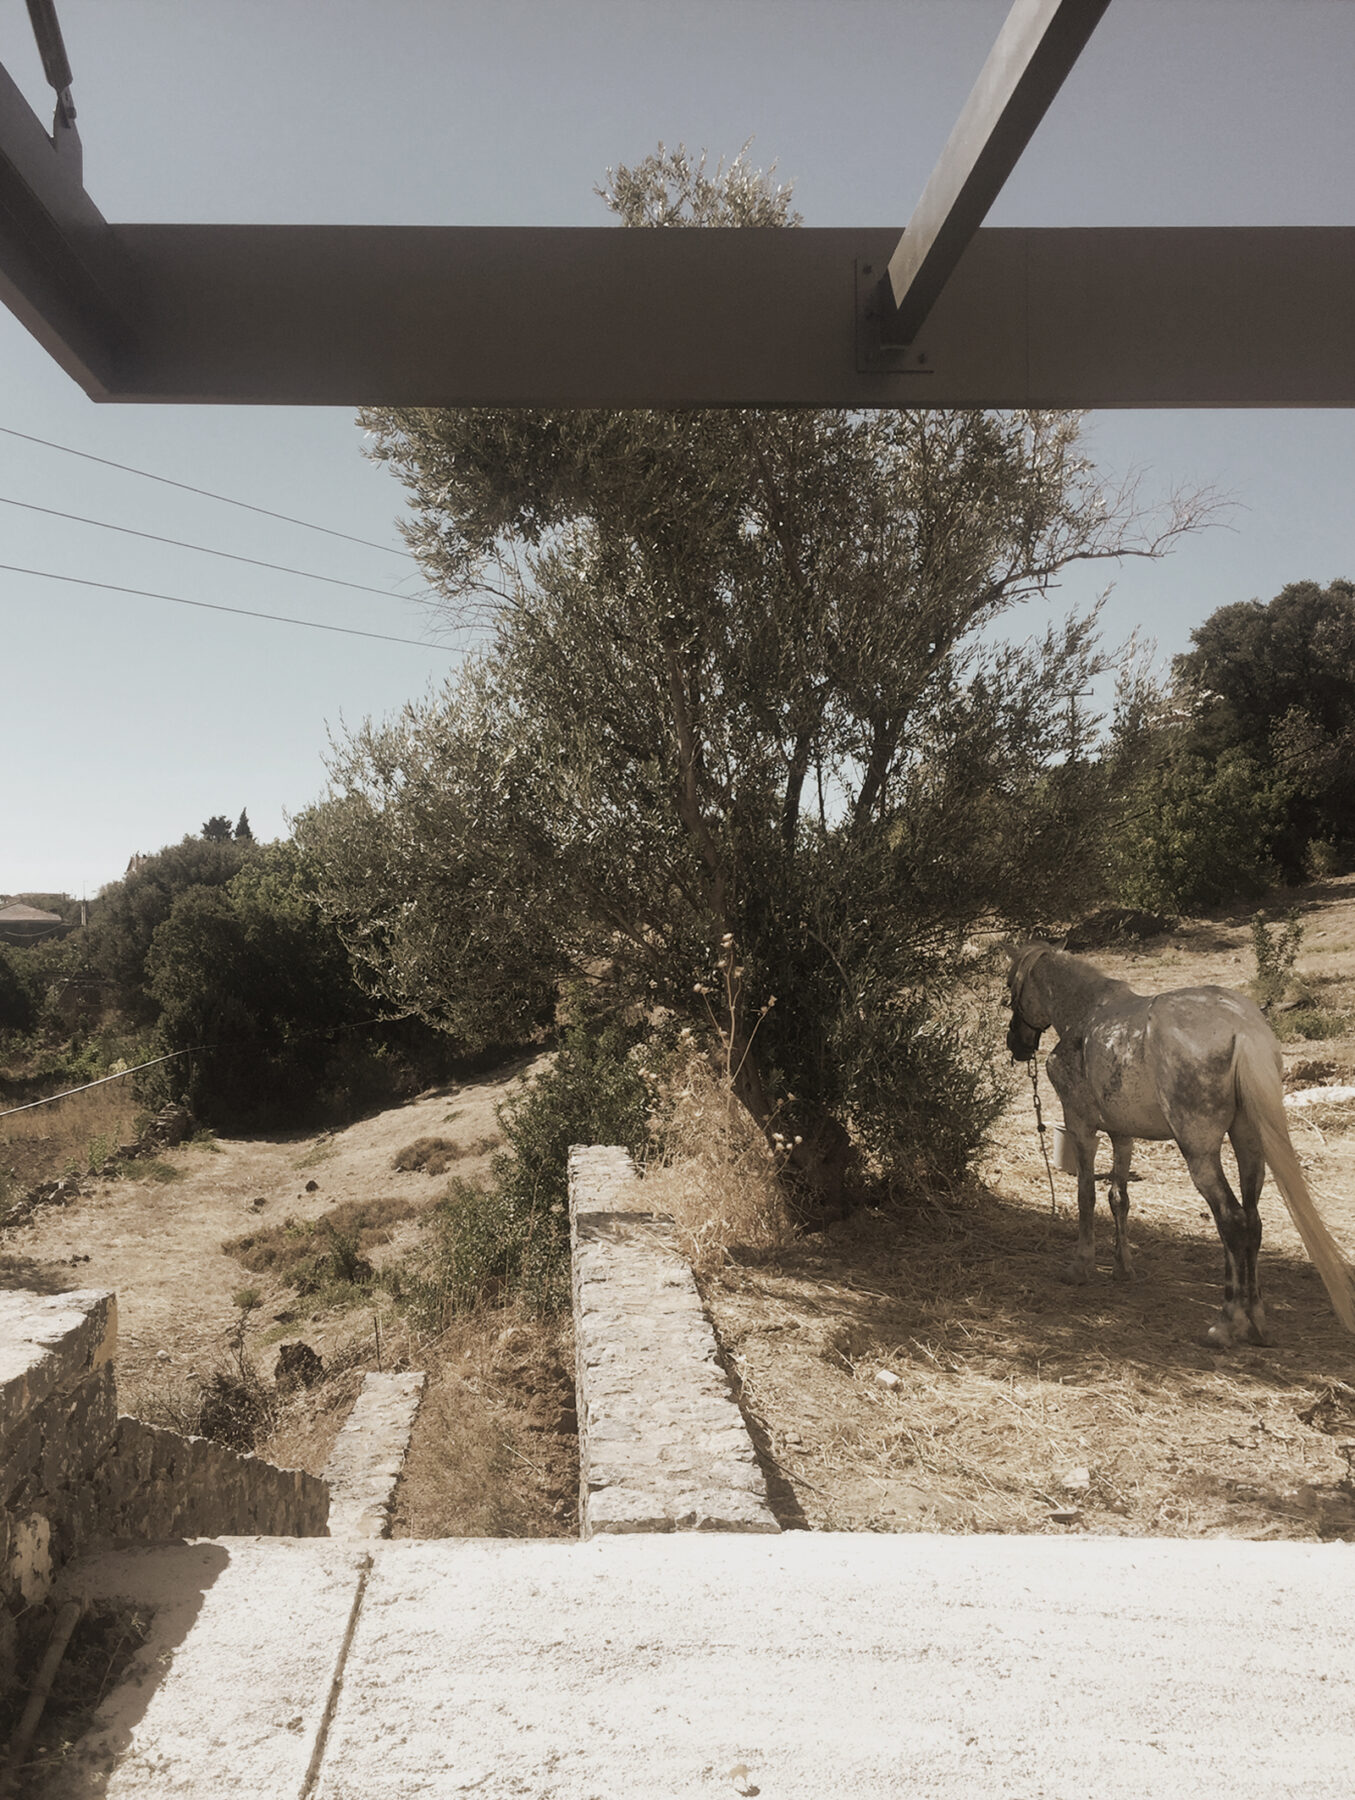 Archisearch Longhouse II in Chios island, Greece | SOUTH architecture